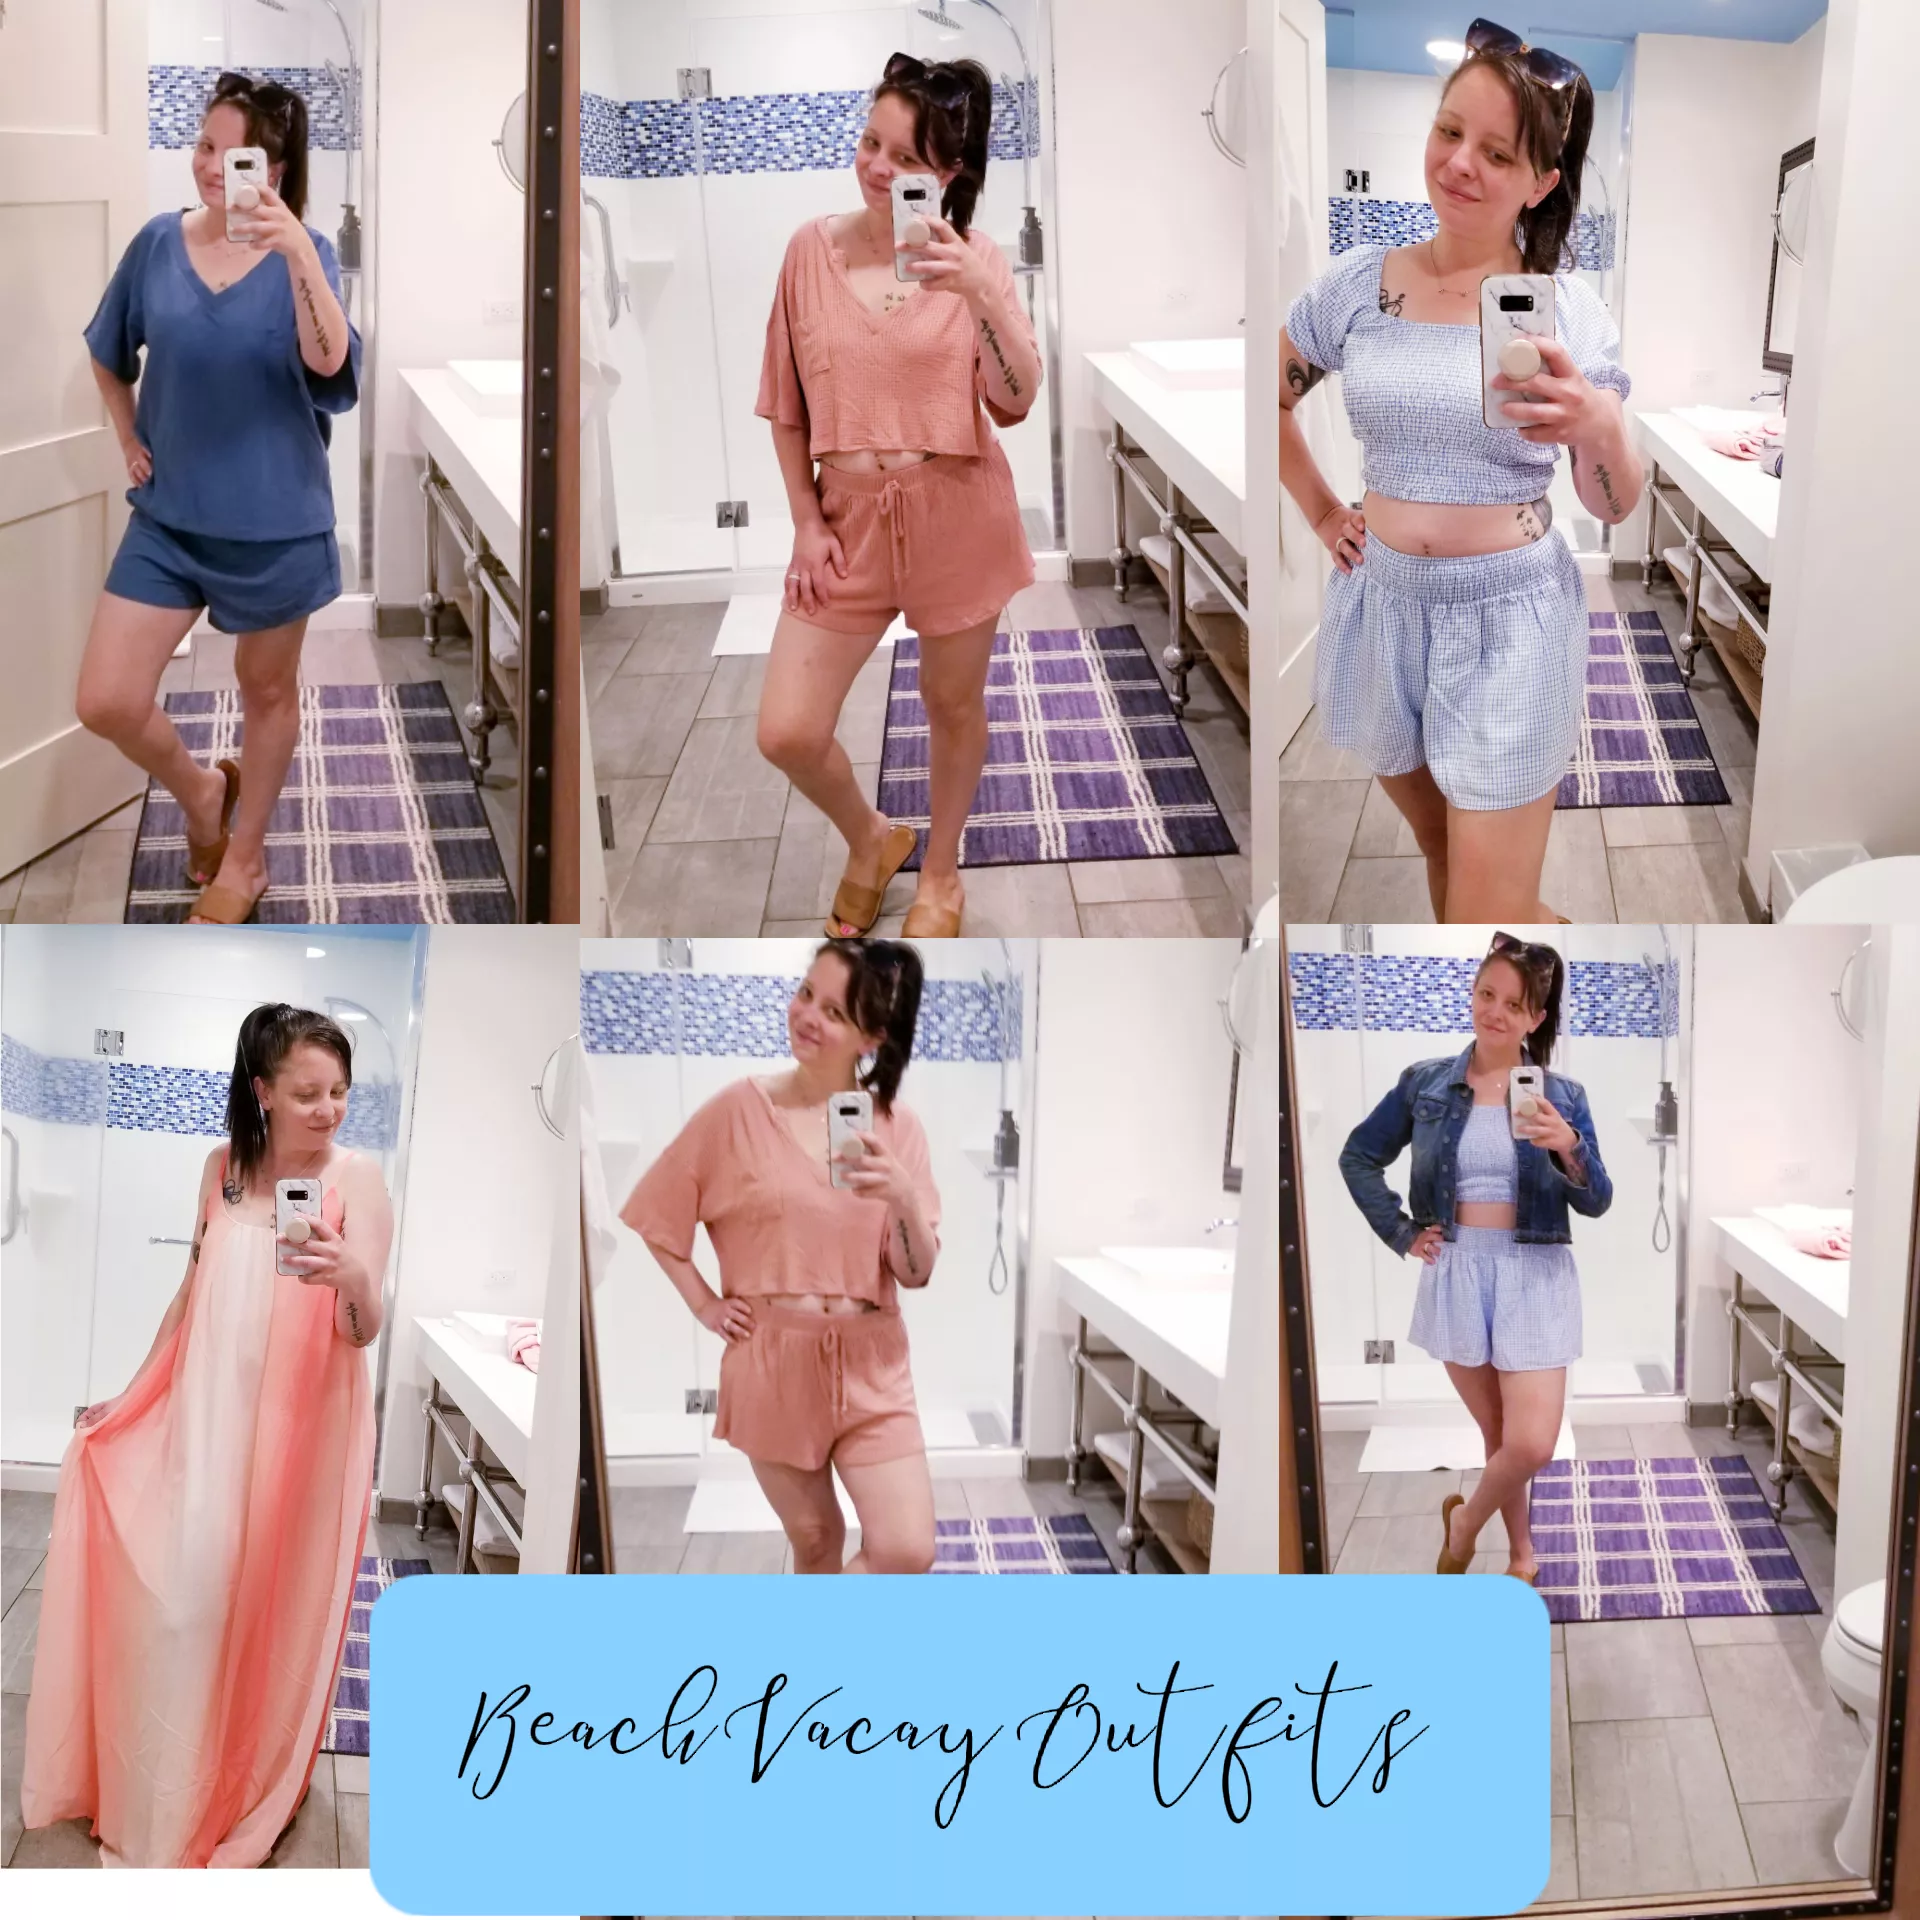 Beach Vacay Outfits 's images